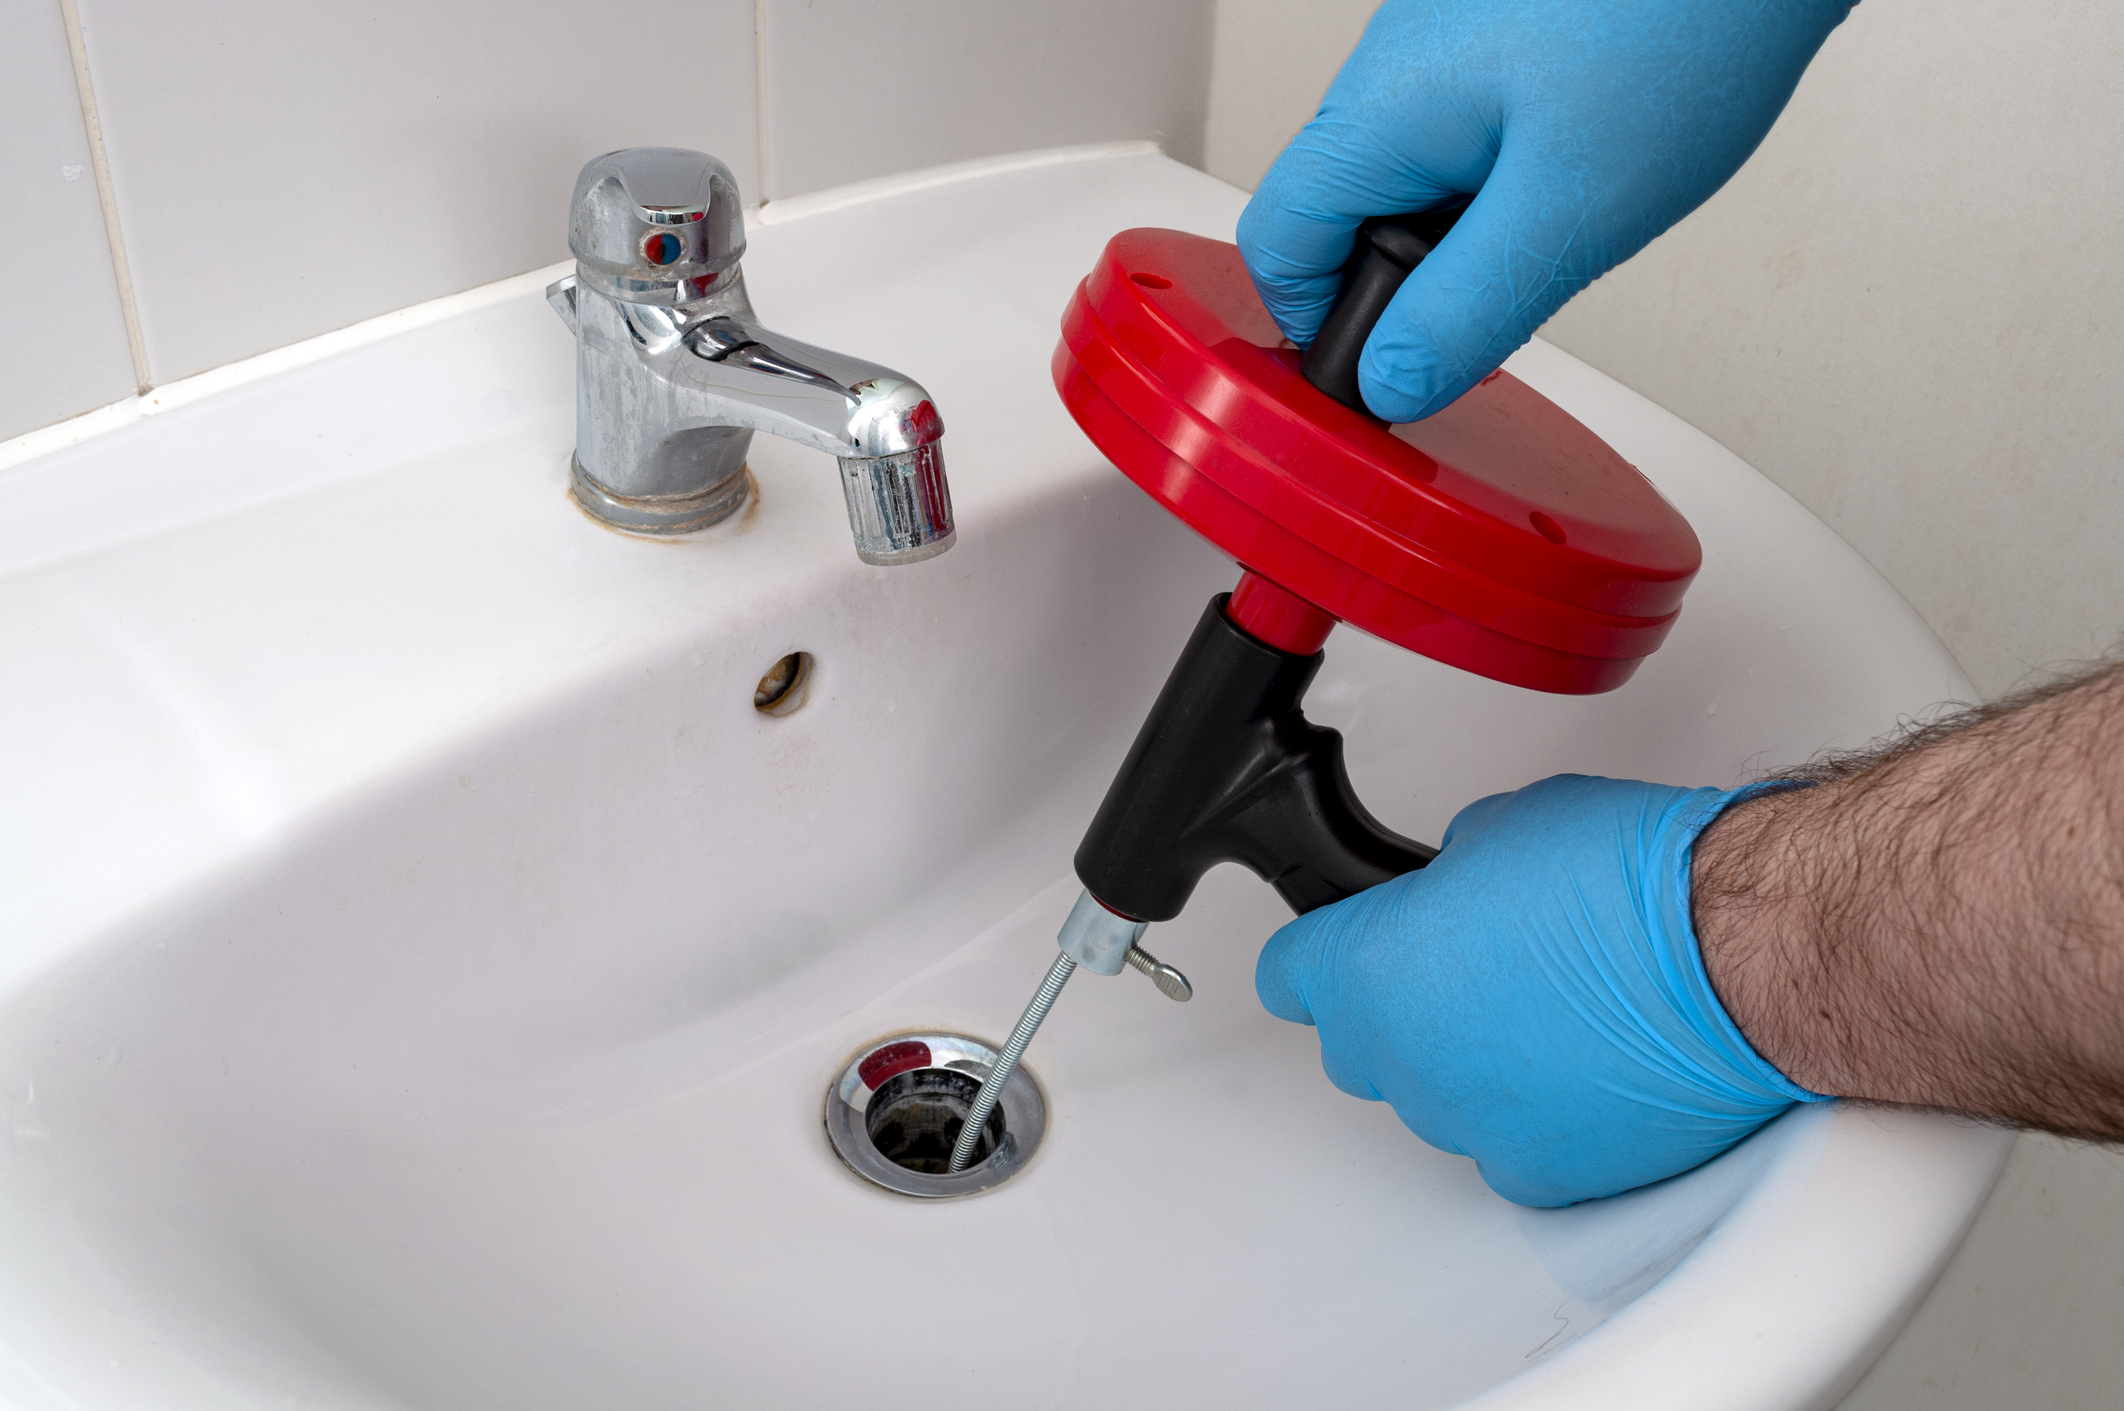 Man’s hands using a drain snake to clean a sink drain